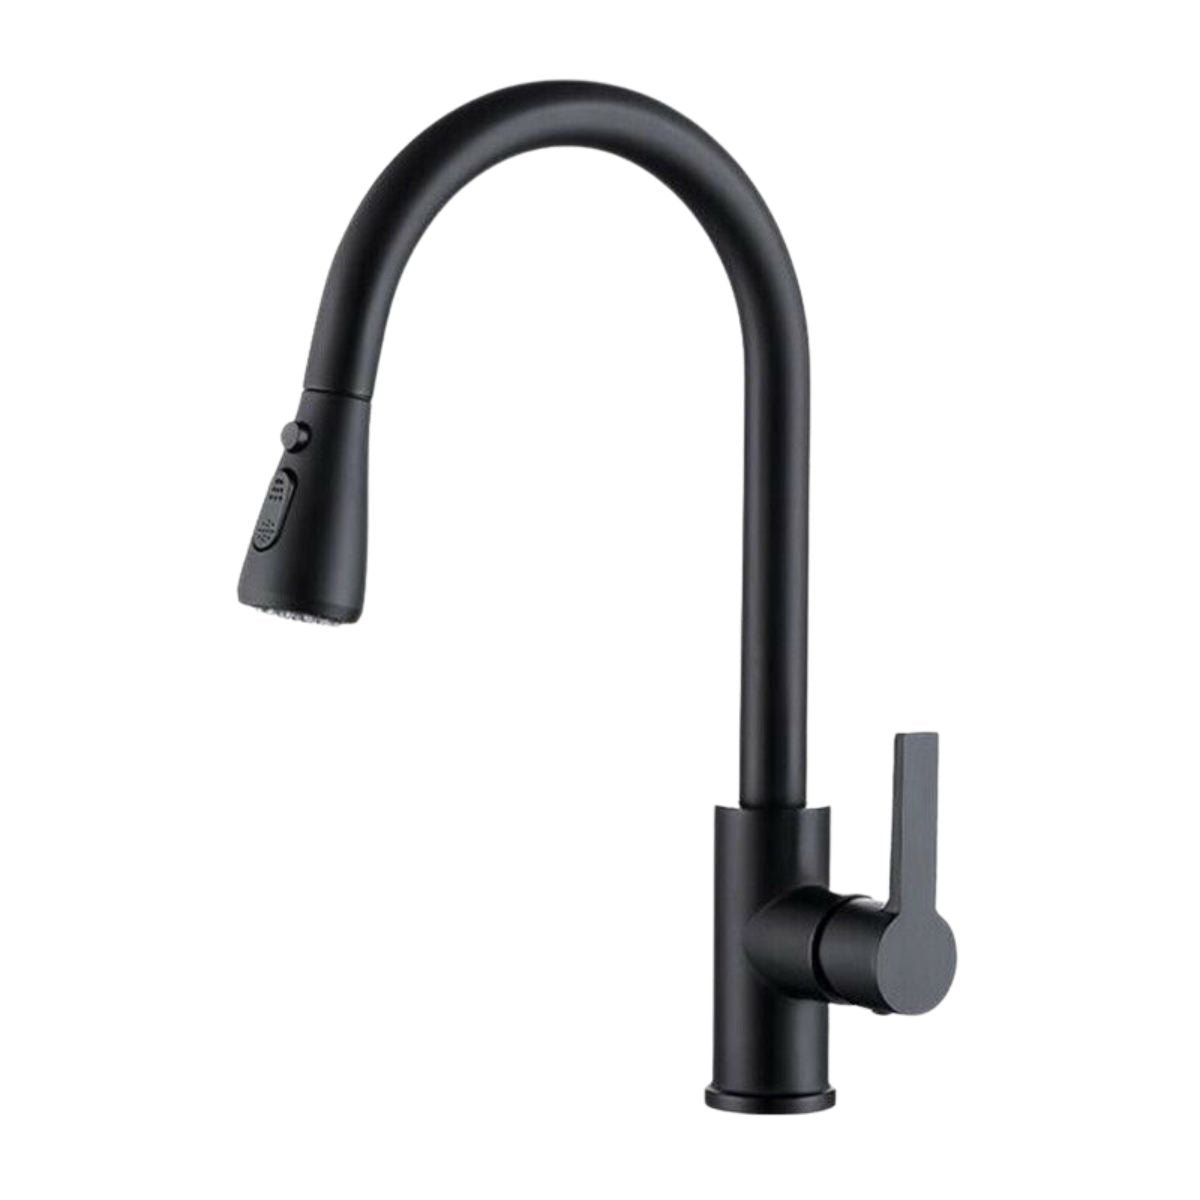 TovaHaus Kitchen Sink Taps Mixer with Pull Out Spray, Swivel Single Handle Pull Down Stainless Steel Kitchen Faucet for UK Standard Fittings - TovaHaus